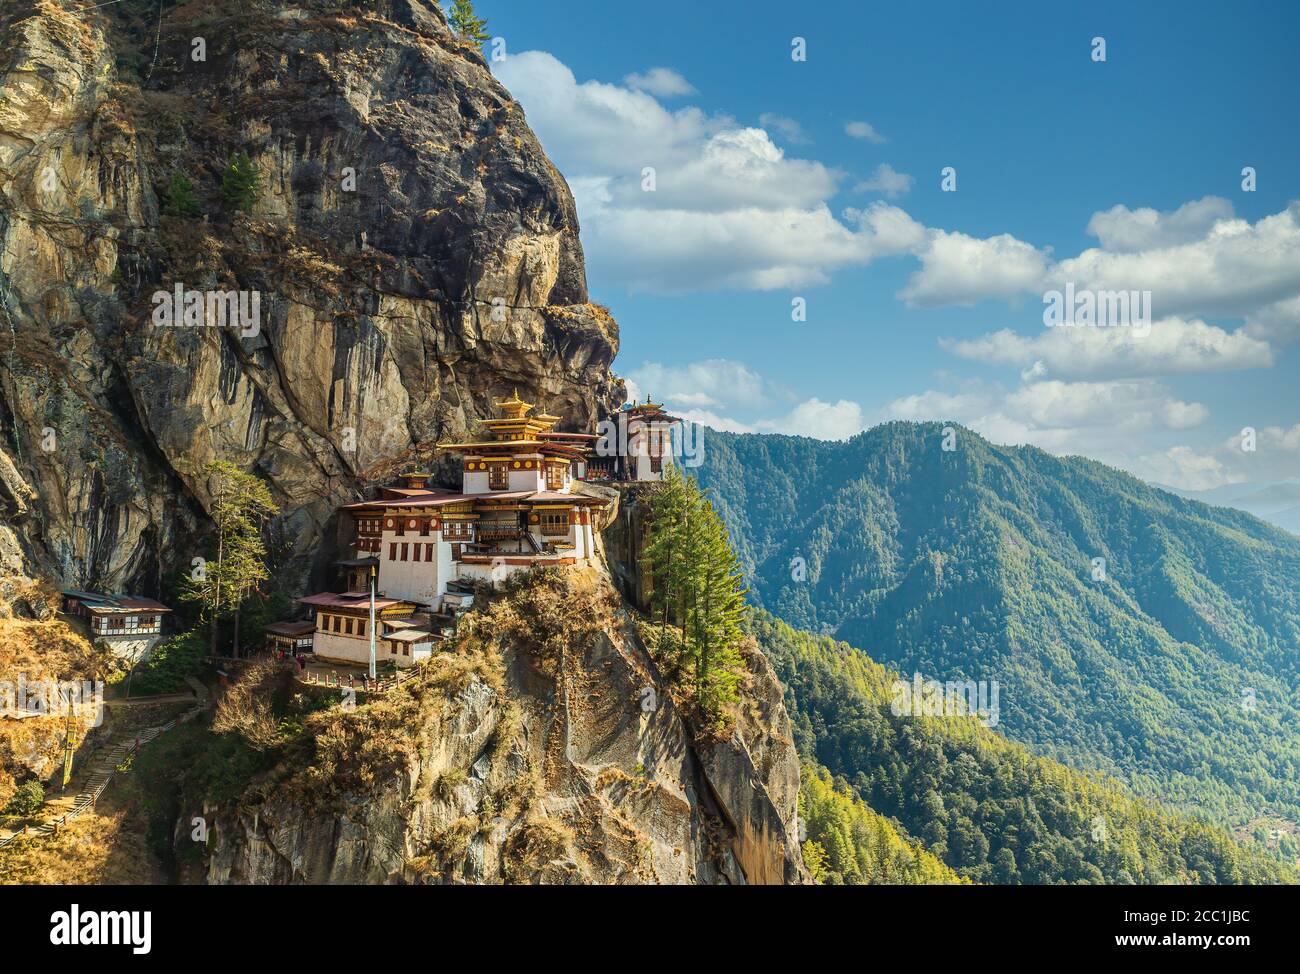 A view of the cliffside Tiger's Nest Monastery in Paro, Bhutan Stock Photo